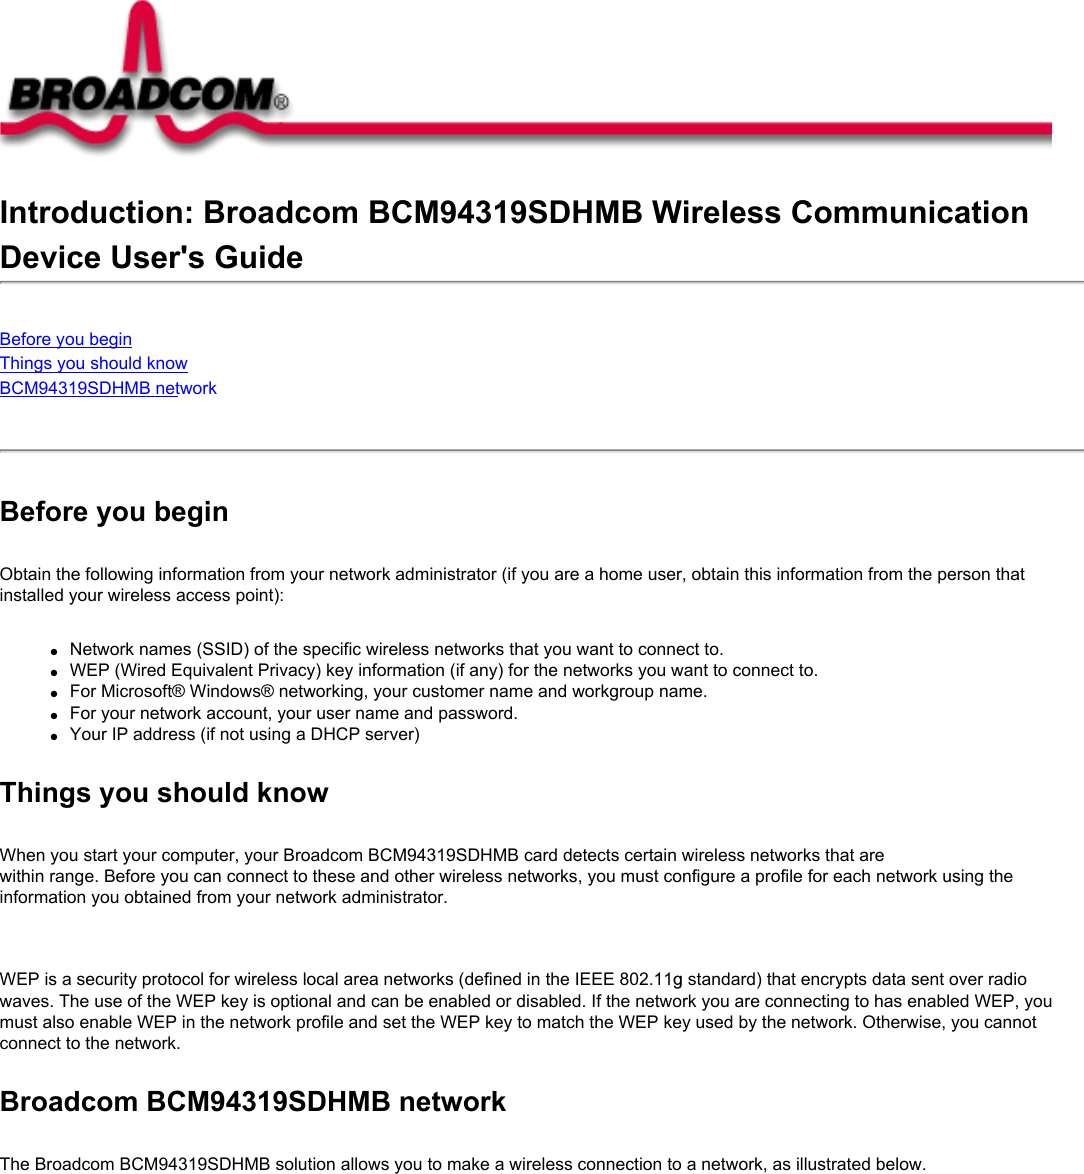 Introduction: Broadcom BCM94319SDHMB Wireless CommunicationDevice User&apos;s GuideBefore you beginThings you should knowBCM94319SDHMB network Before you beginObtain the following information from your network administrator (if you are a home user, obtain this information from the person that installed your wireless access point):●     Network names (SSID) of the specific wireless networks that you want to connect to.●     WEP (Wired Equivalent Privacy) key information (if any) for the networks you want to connect to.●     For Microsoft® Windows® networking, your customer name and workgroup name.●     For your network account, your user name and password.●     Your IP address (if not using a DHCP server)Things you should knowWhen you start your computer, your Broadcom BCM94319SDHMB card detects certain wireless networks that are within range. Before you can connect to these and other wireless networks, you must configure a profile for each network using the information you obtained from your network administrator.   WEP is a security protocol for wireless local area networks (defined in the IEEE 802.11g standard) that encrypts data sent over radio waves. The use of the WEP key is optional and can be enabled or disabled. If the network you are connecting to has enabled WEP, you must also enable WEP in the network profile and set the WEP key to match the WEP key used by the network. Otherwise, you cannot connect to the network.Broadcom BCM94319SDHMB networkThe Broadcom BCM94319SDHMB solution allows you to make a wireless connection to a network, as illustrated below.